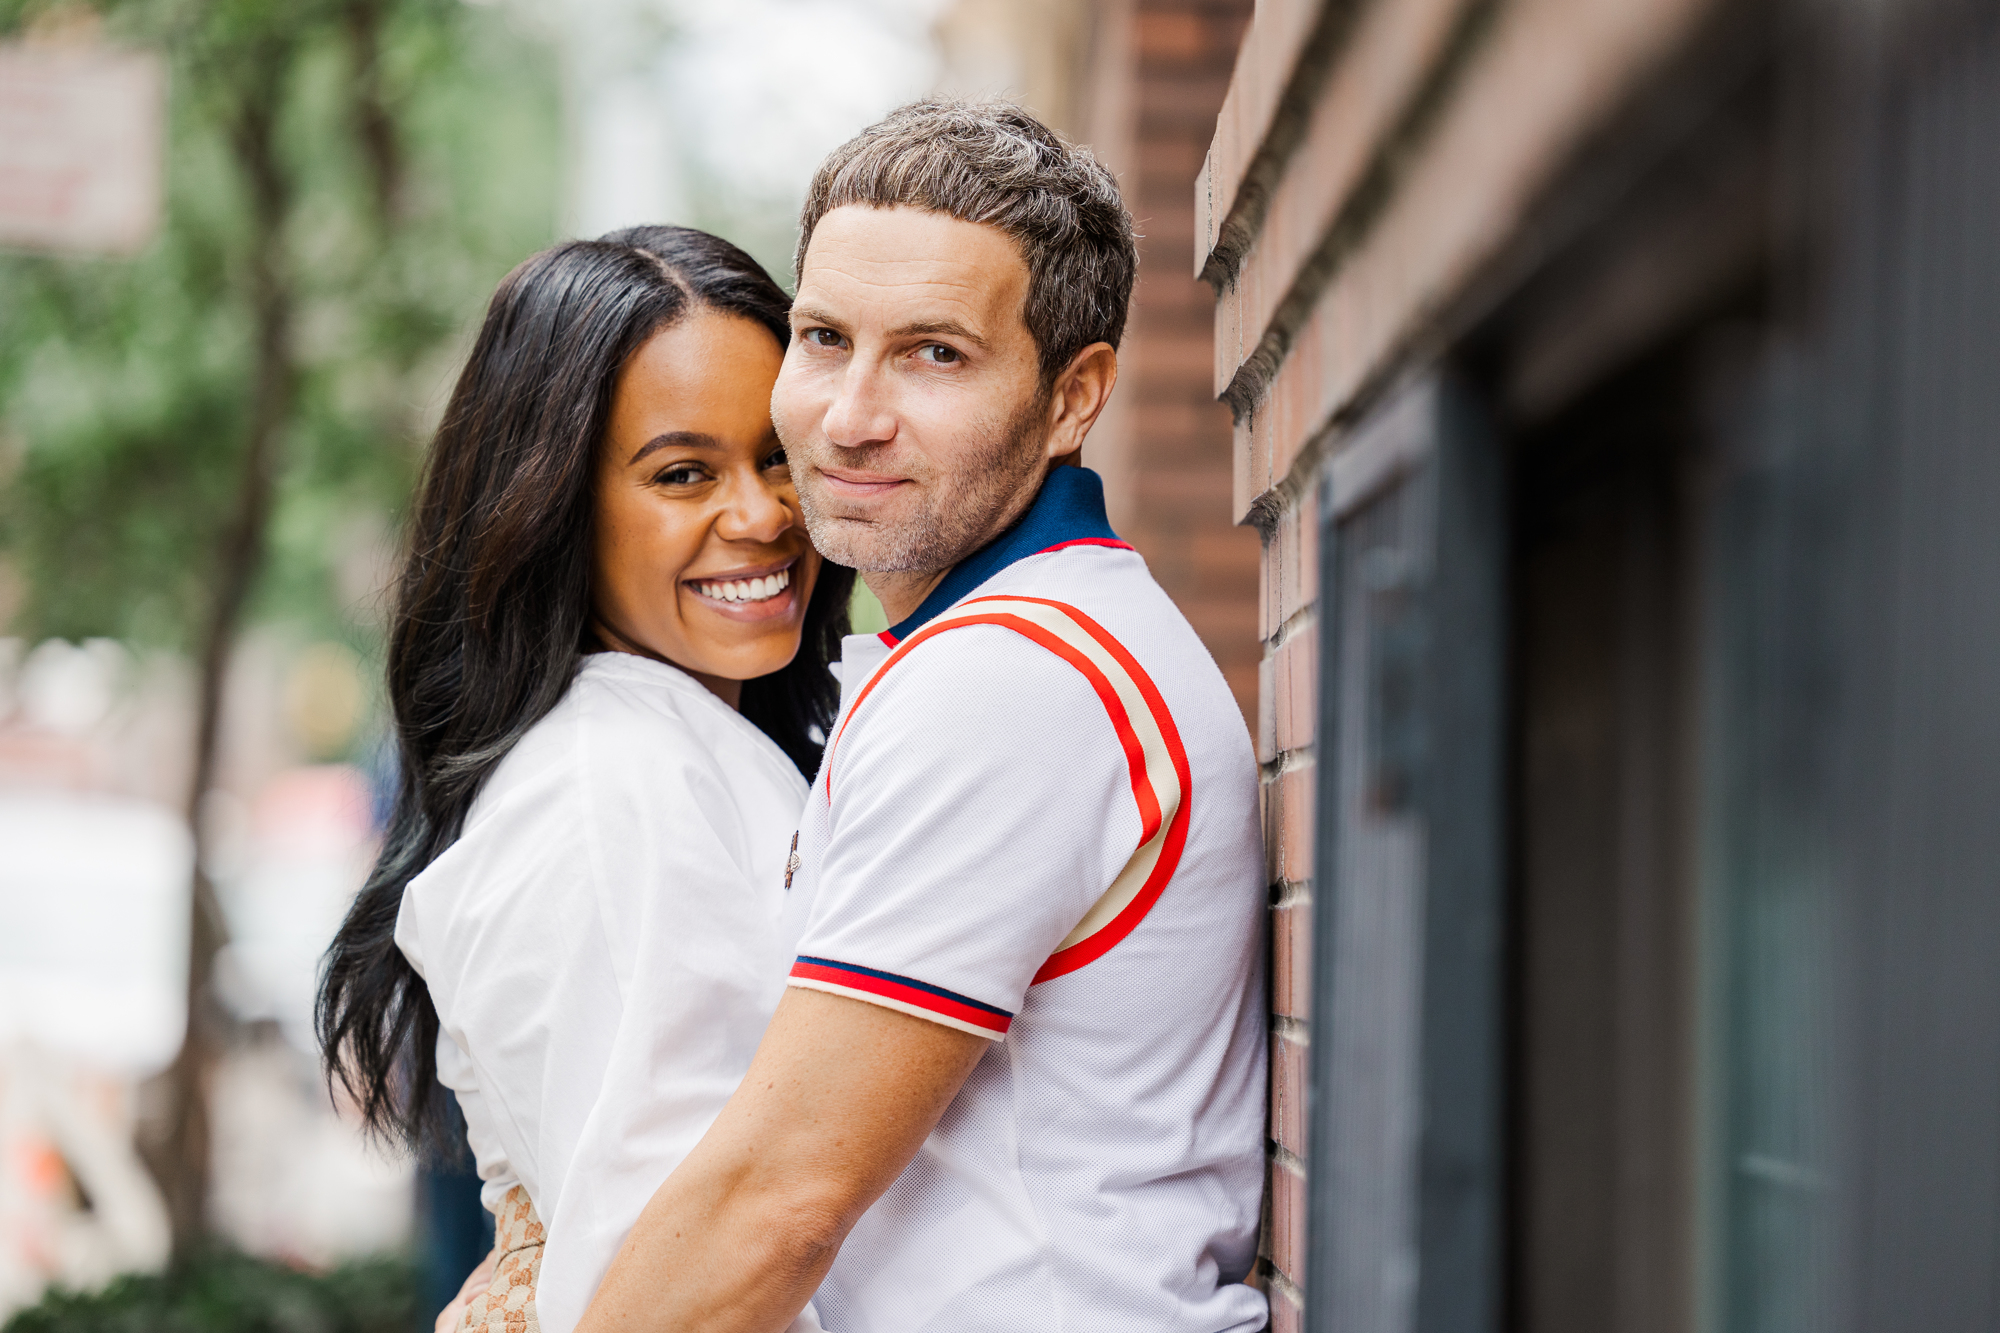 Flawless Meatpacking District Engagement Photos